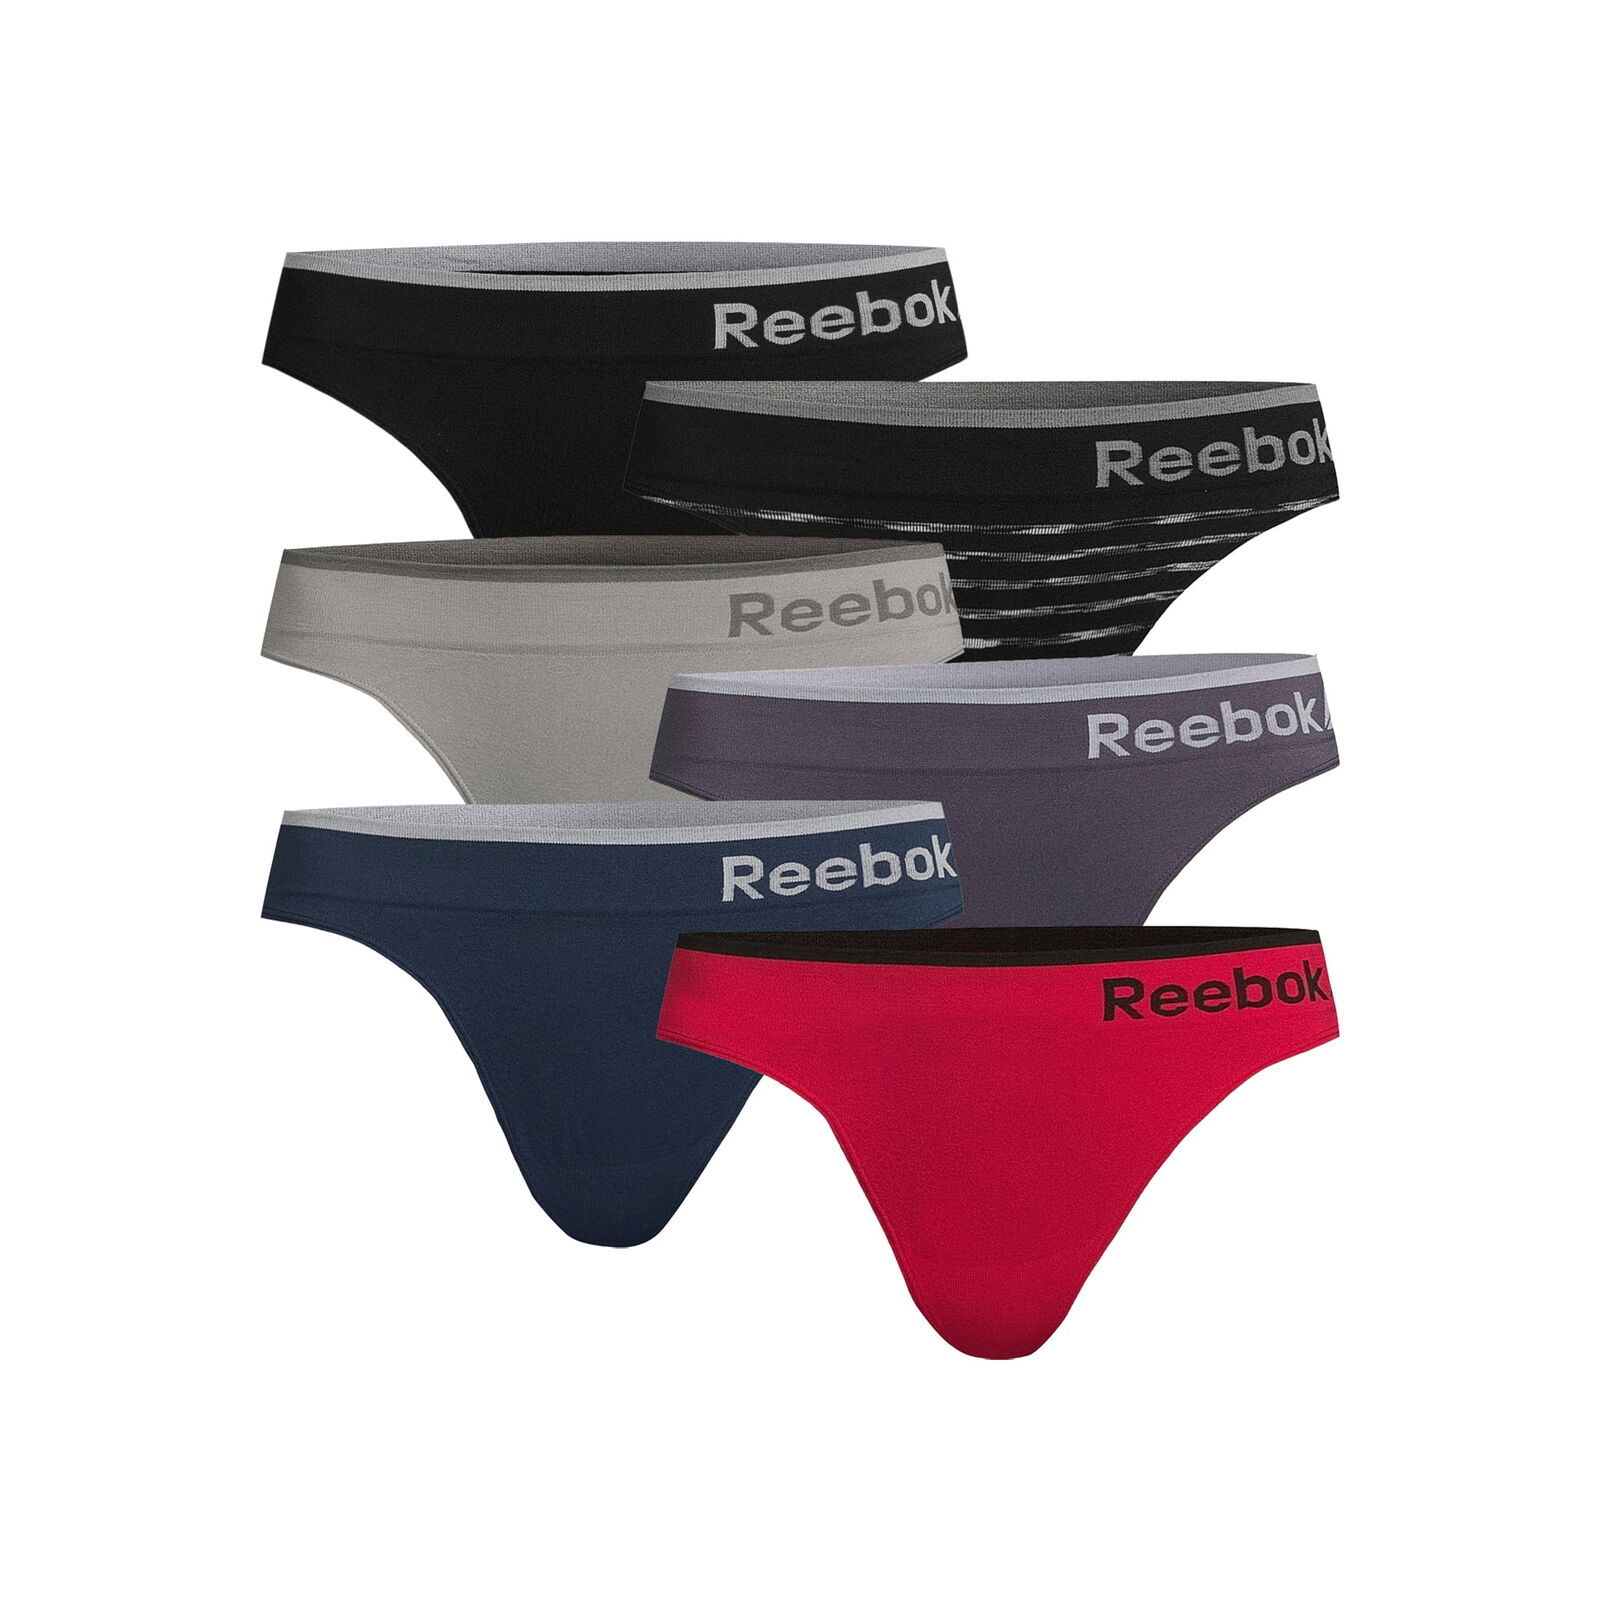 Reebok Women's Seamless Thong, 6-Pack Size and similar items